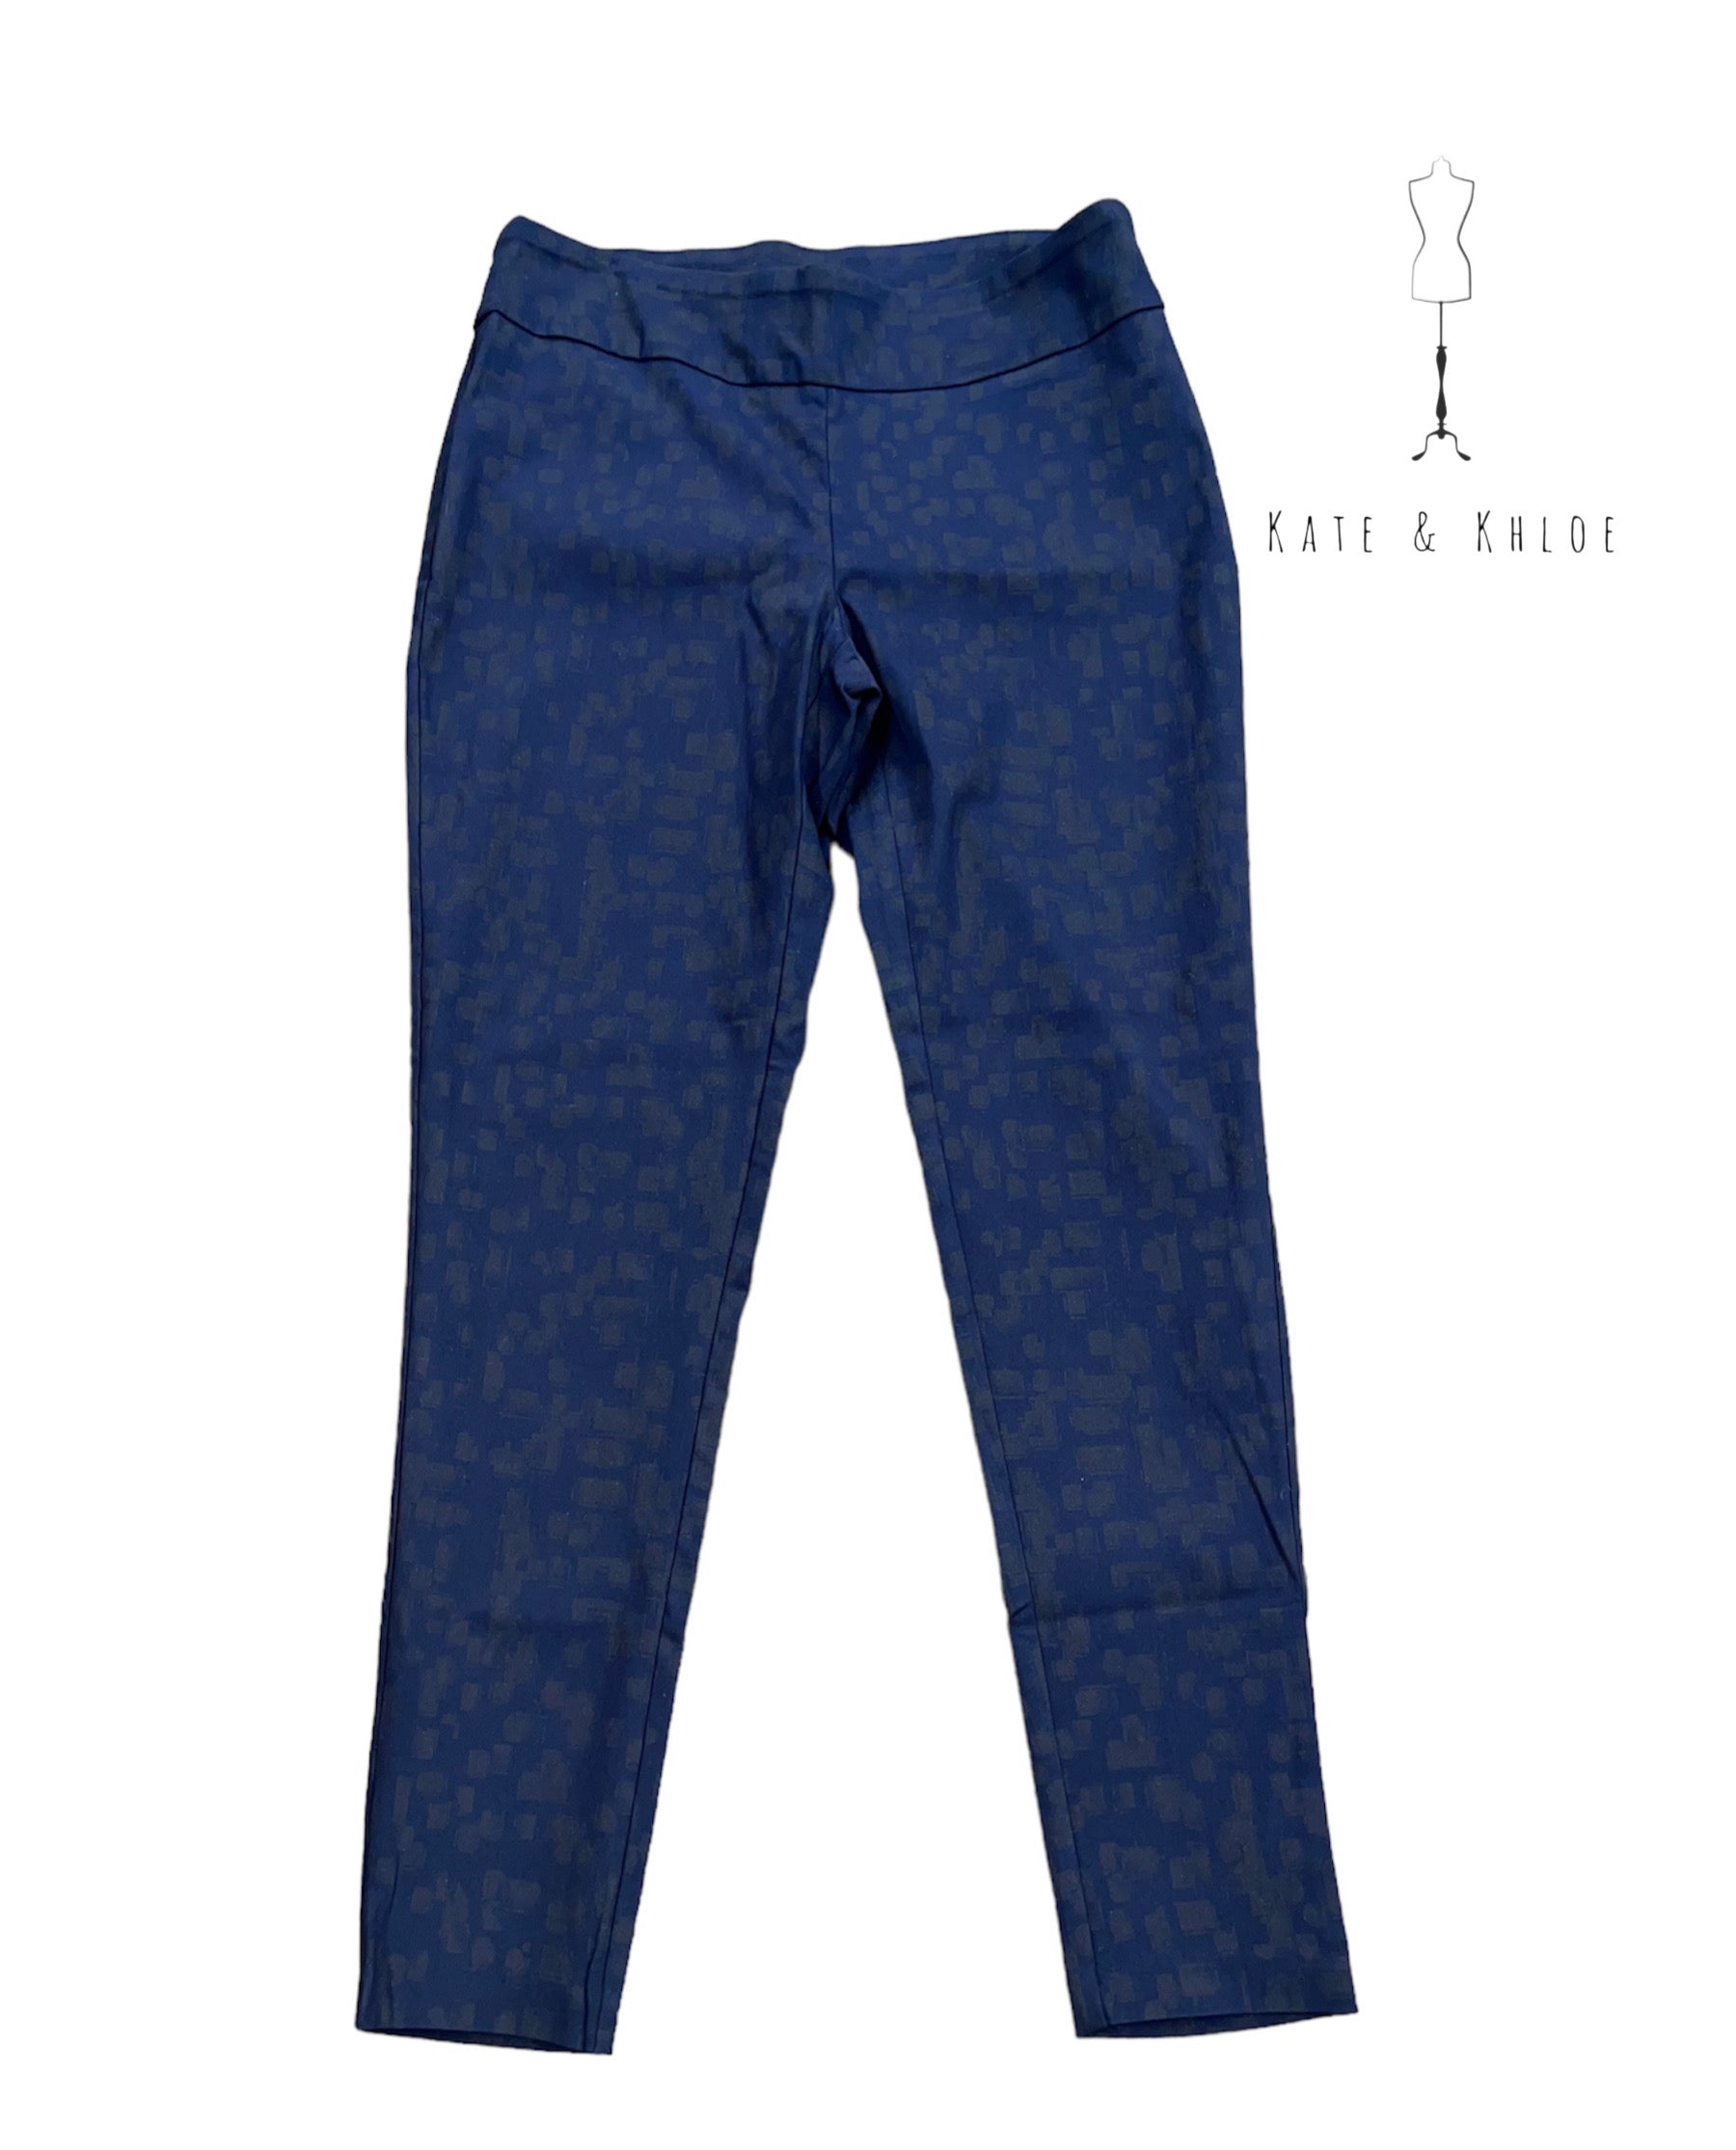 Hiview Pixie Pants – Kate and Khloe